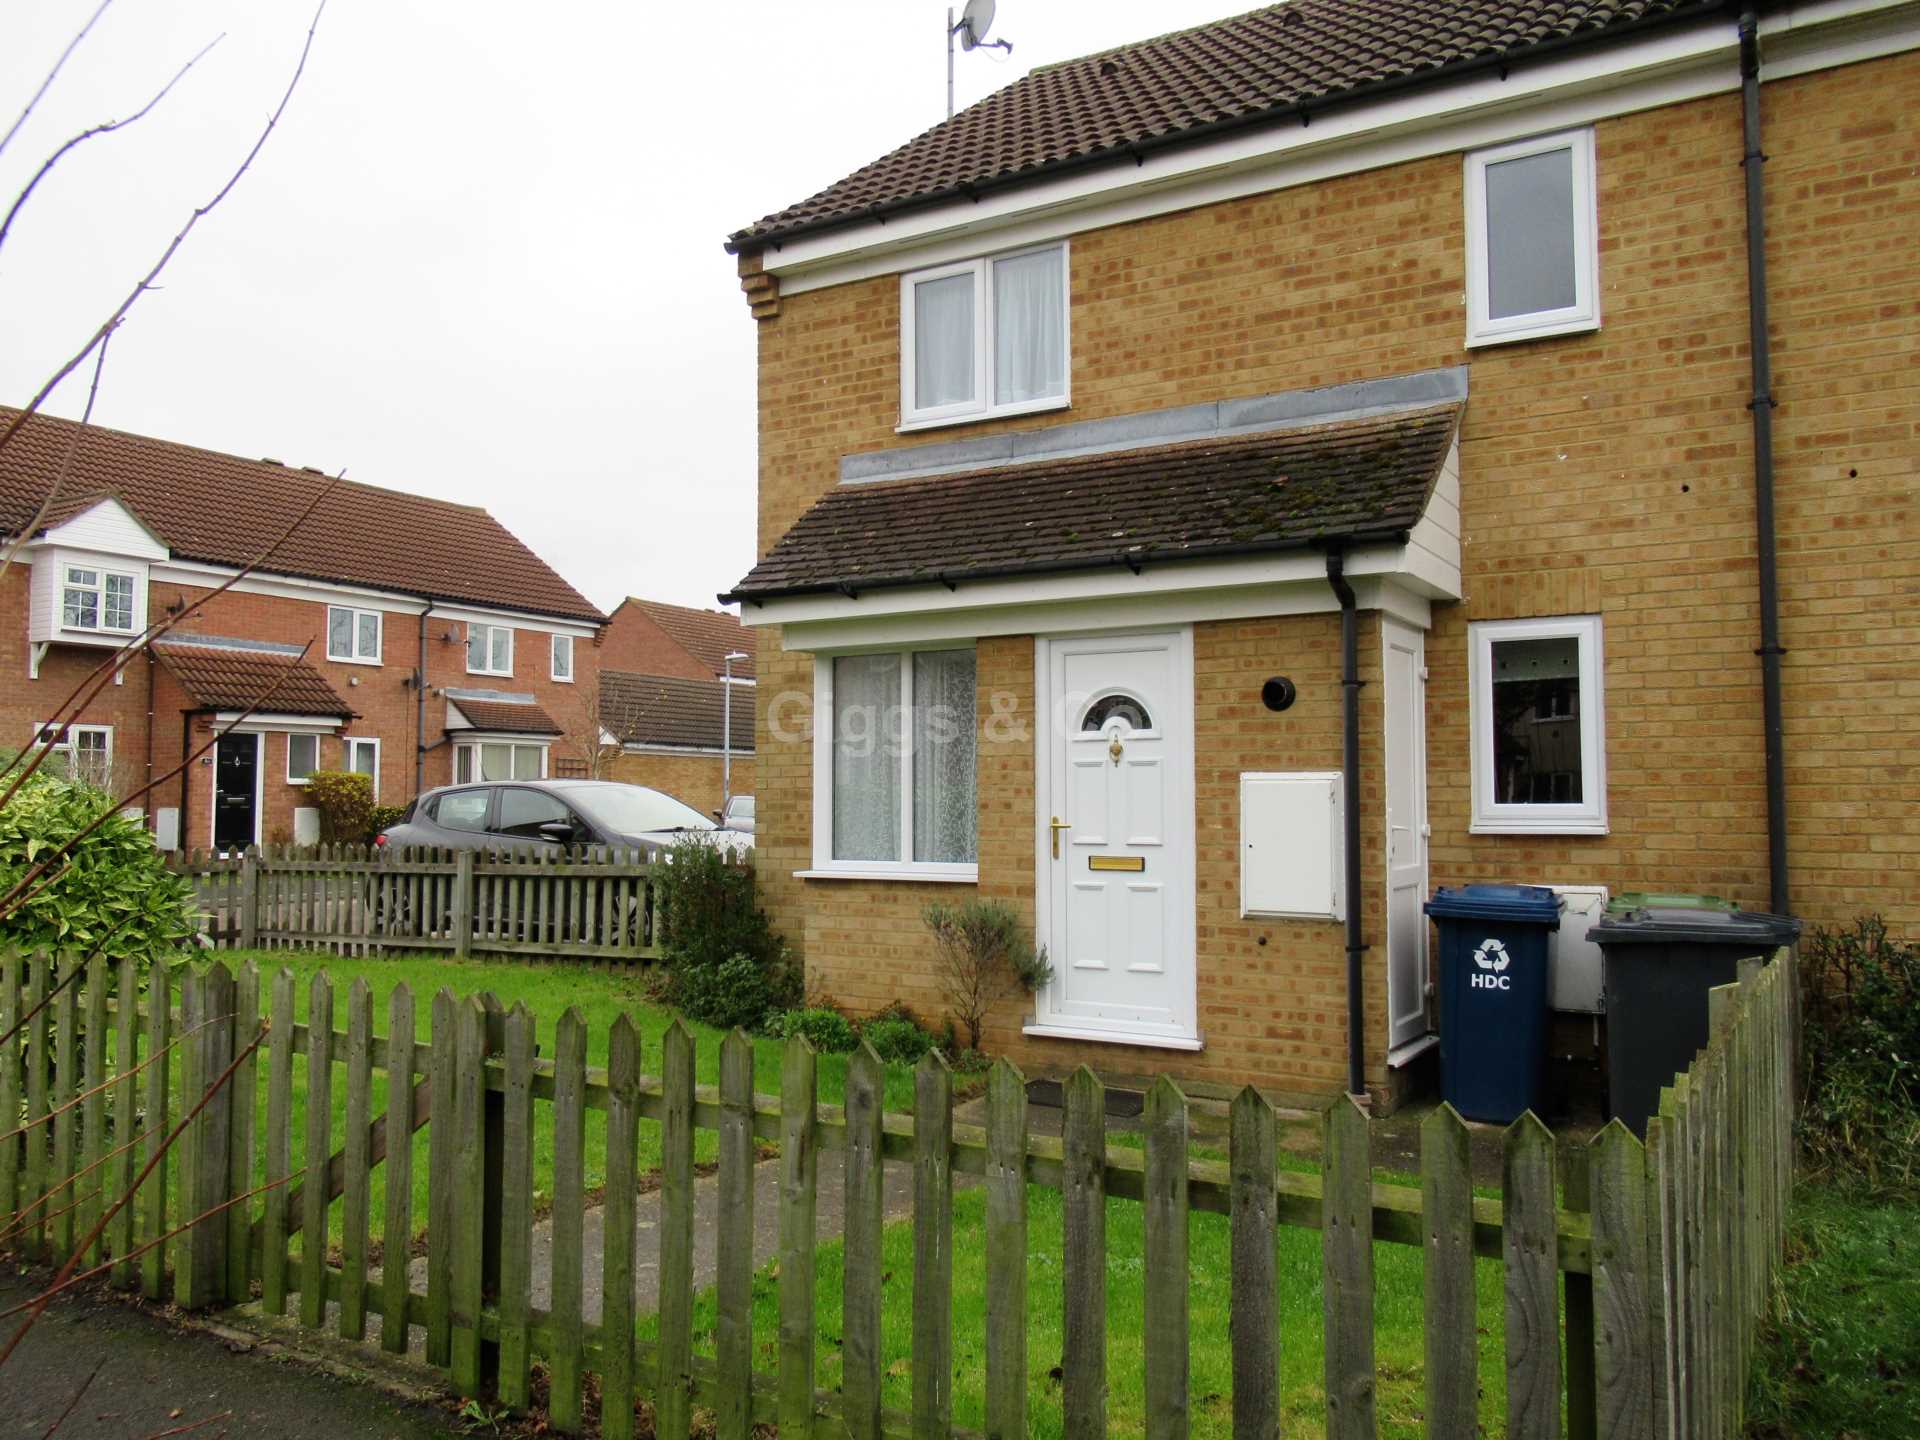 1 bed cluster house to rent in Chawston Close, St Neots - Property Image 1